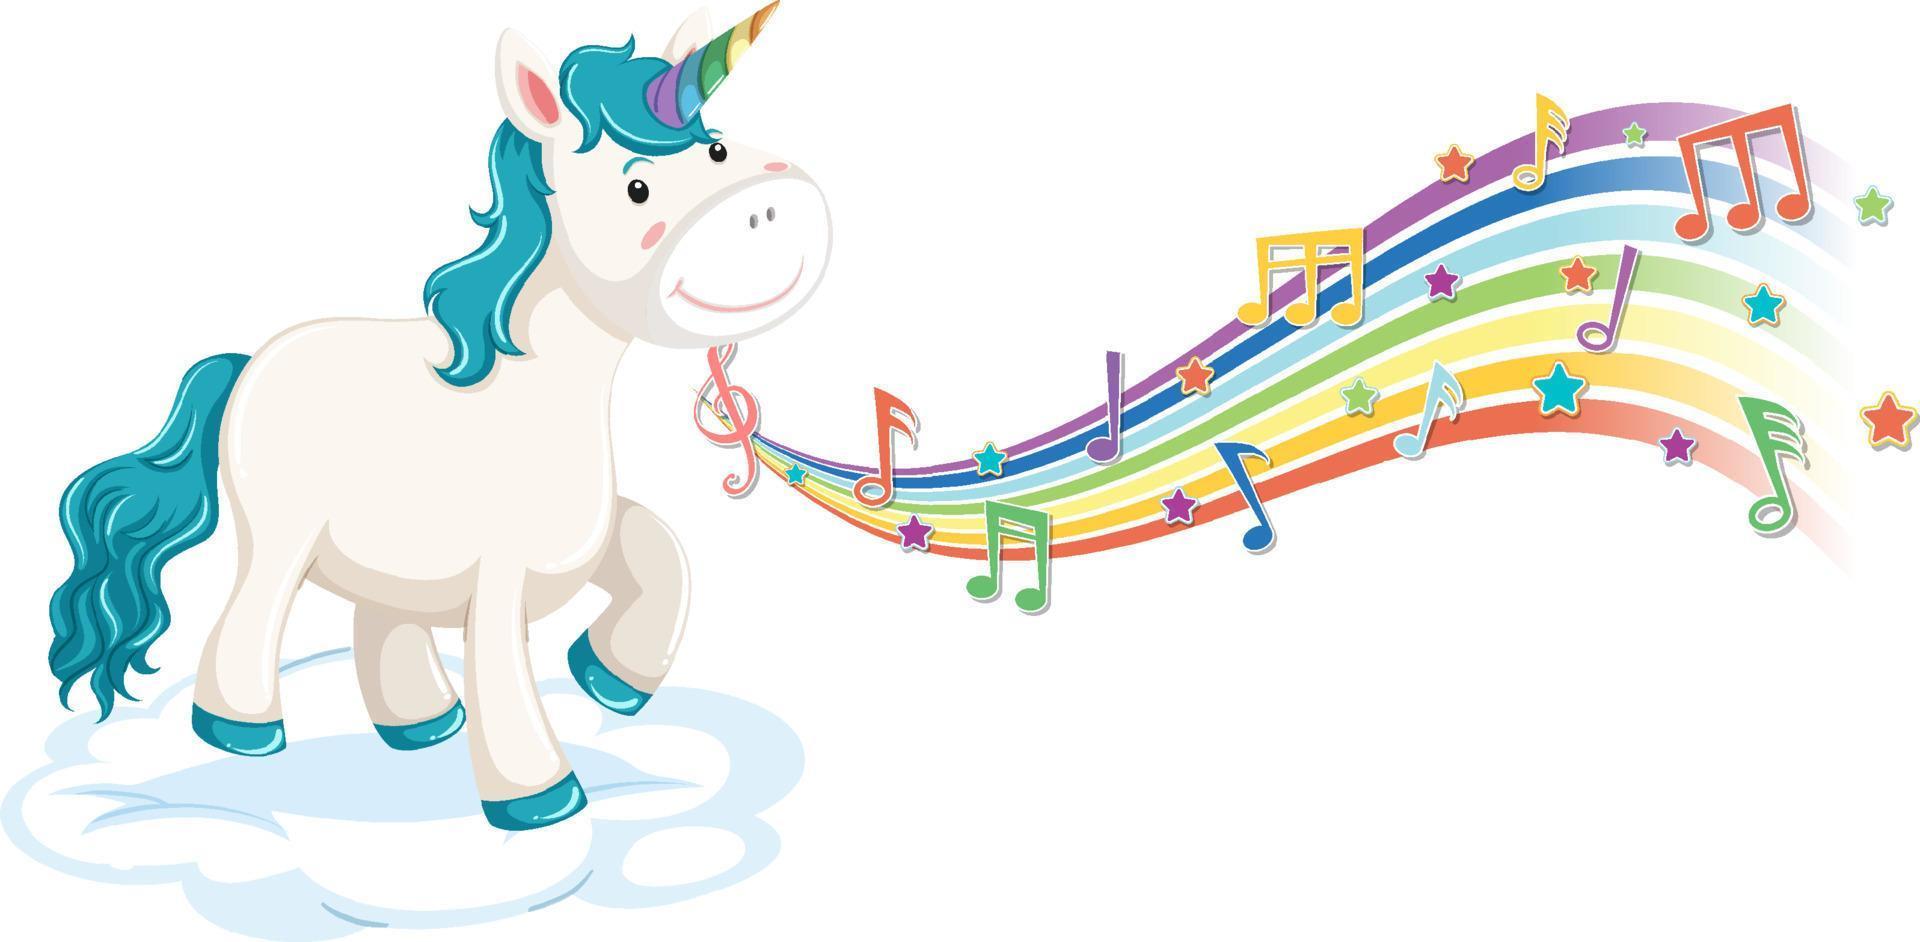 Blue unicorn standing on the cloud with melody symbols on rainbow vector